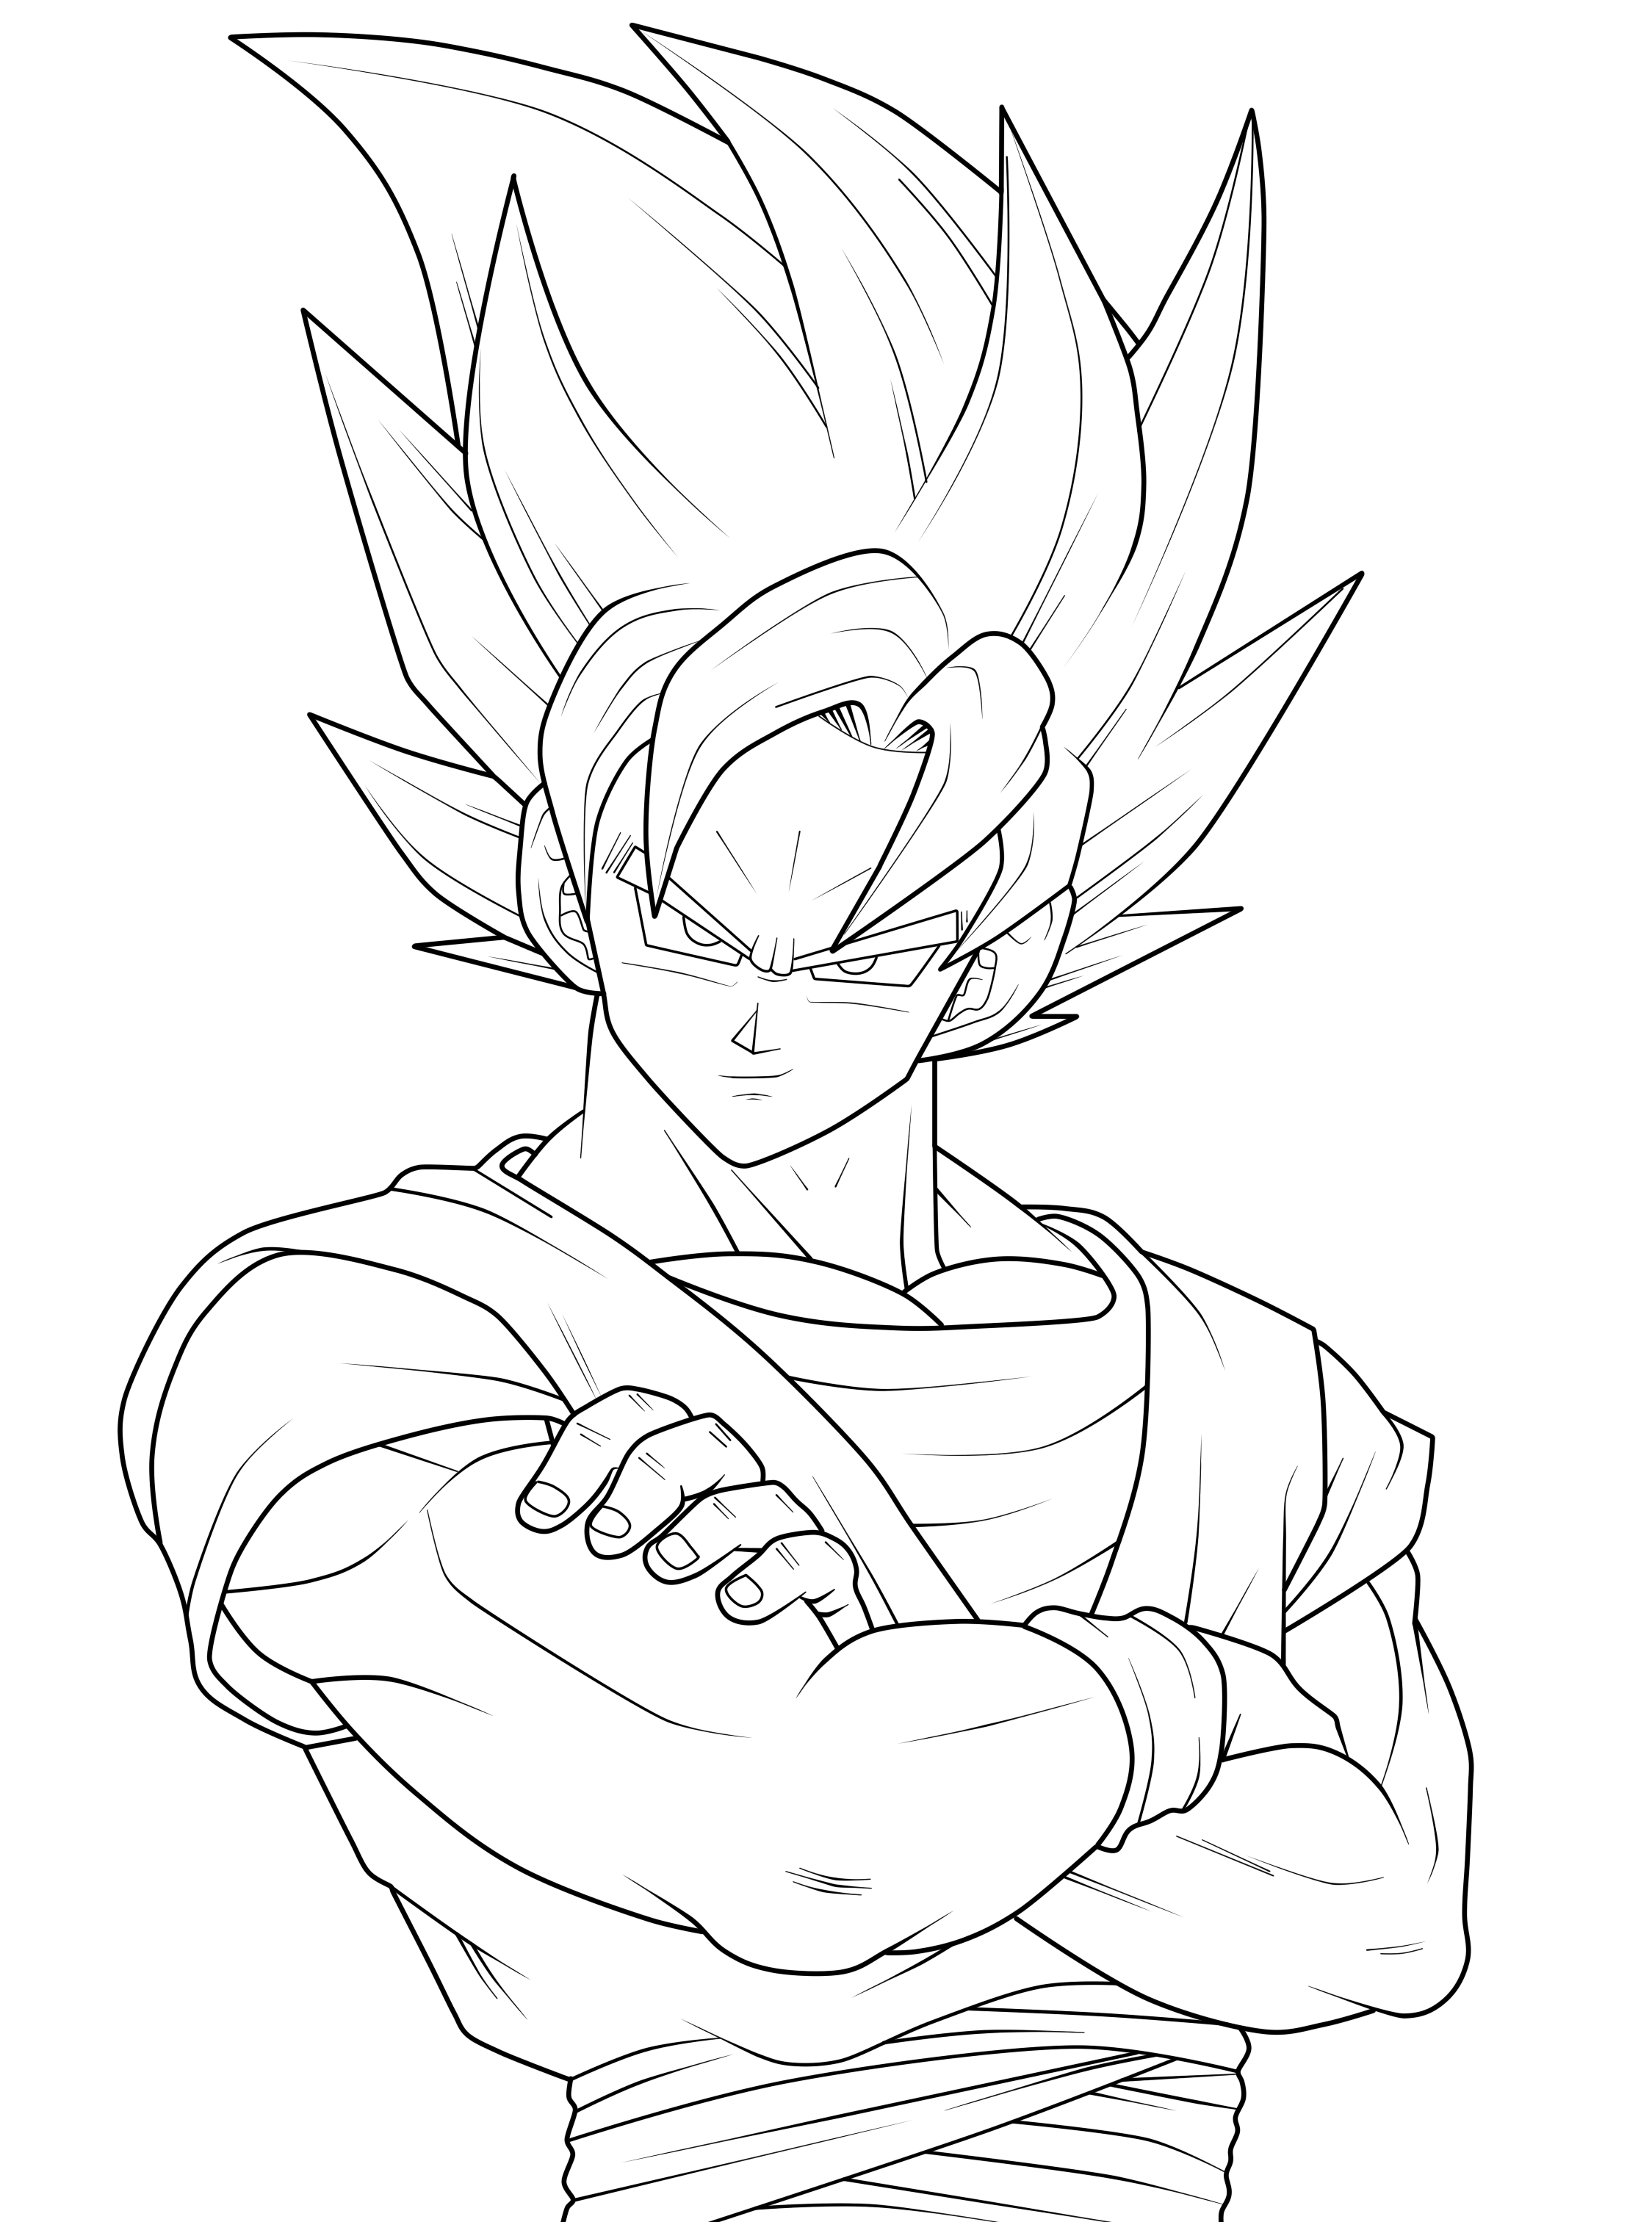 Ssj4 Goku Coloring Page Coloring Home